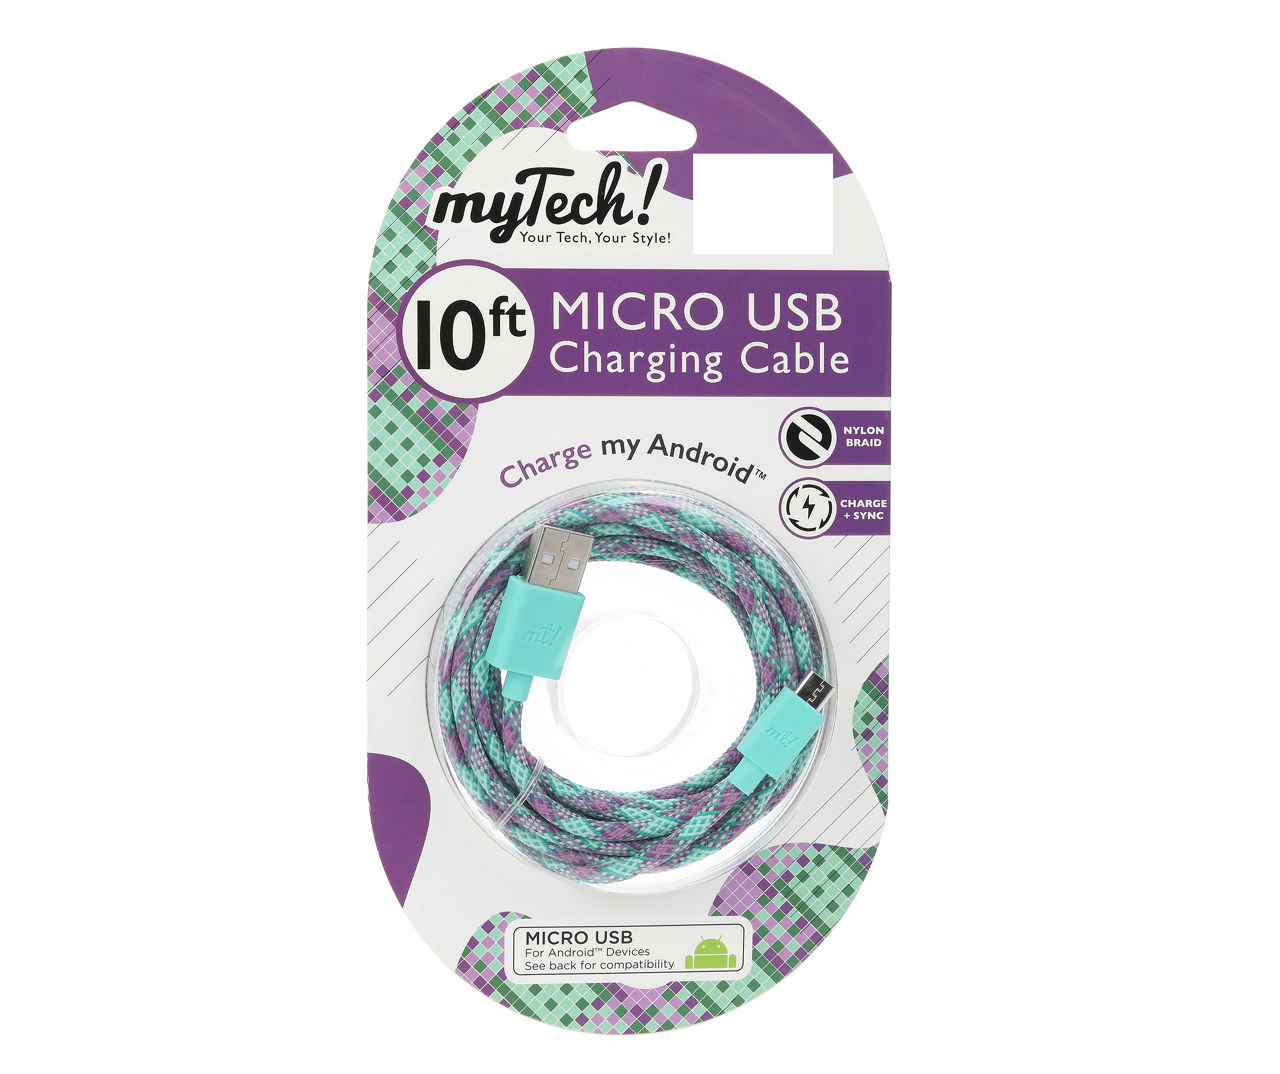 Mint & Purple Braided 10' Micro USB Cable